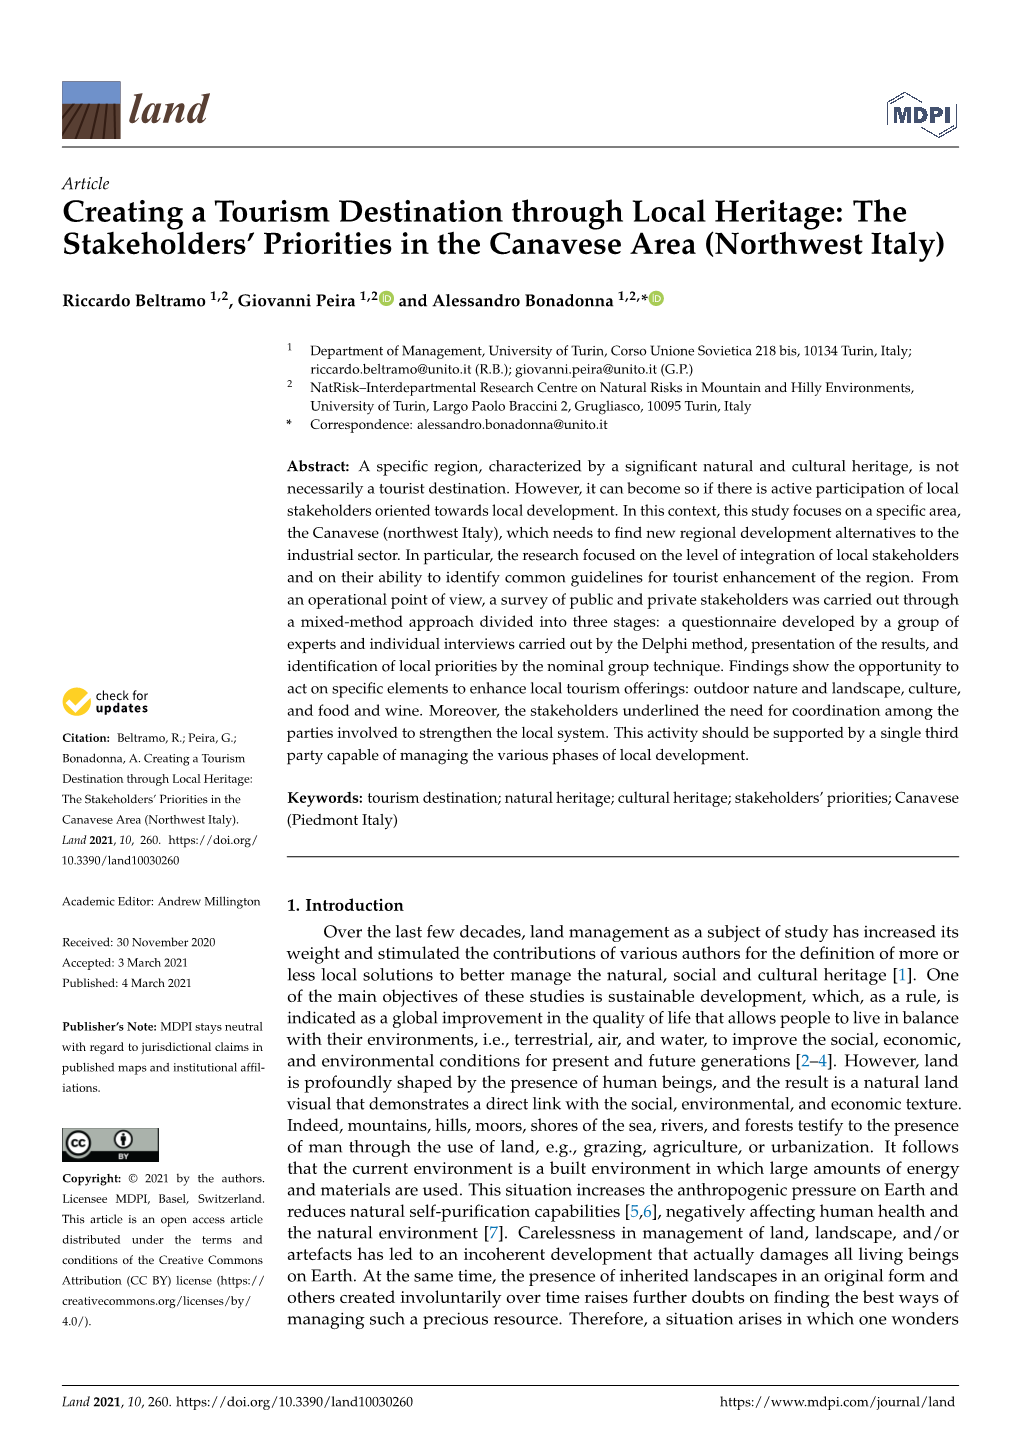 Creating a Tourism Destination Through Local Heritage: the Stakeholders’ Priorities in the Canavese Area (Northwest Italy)